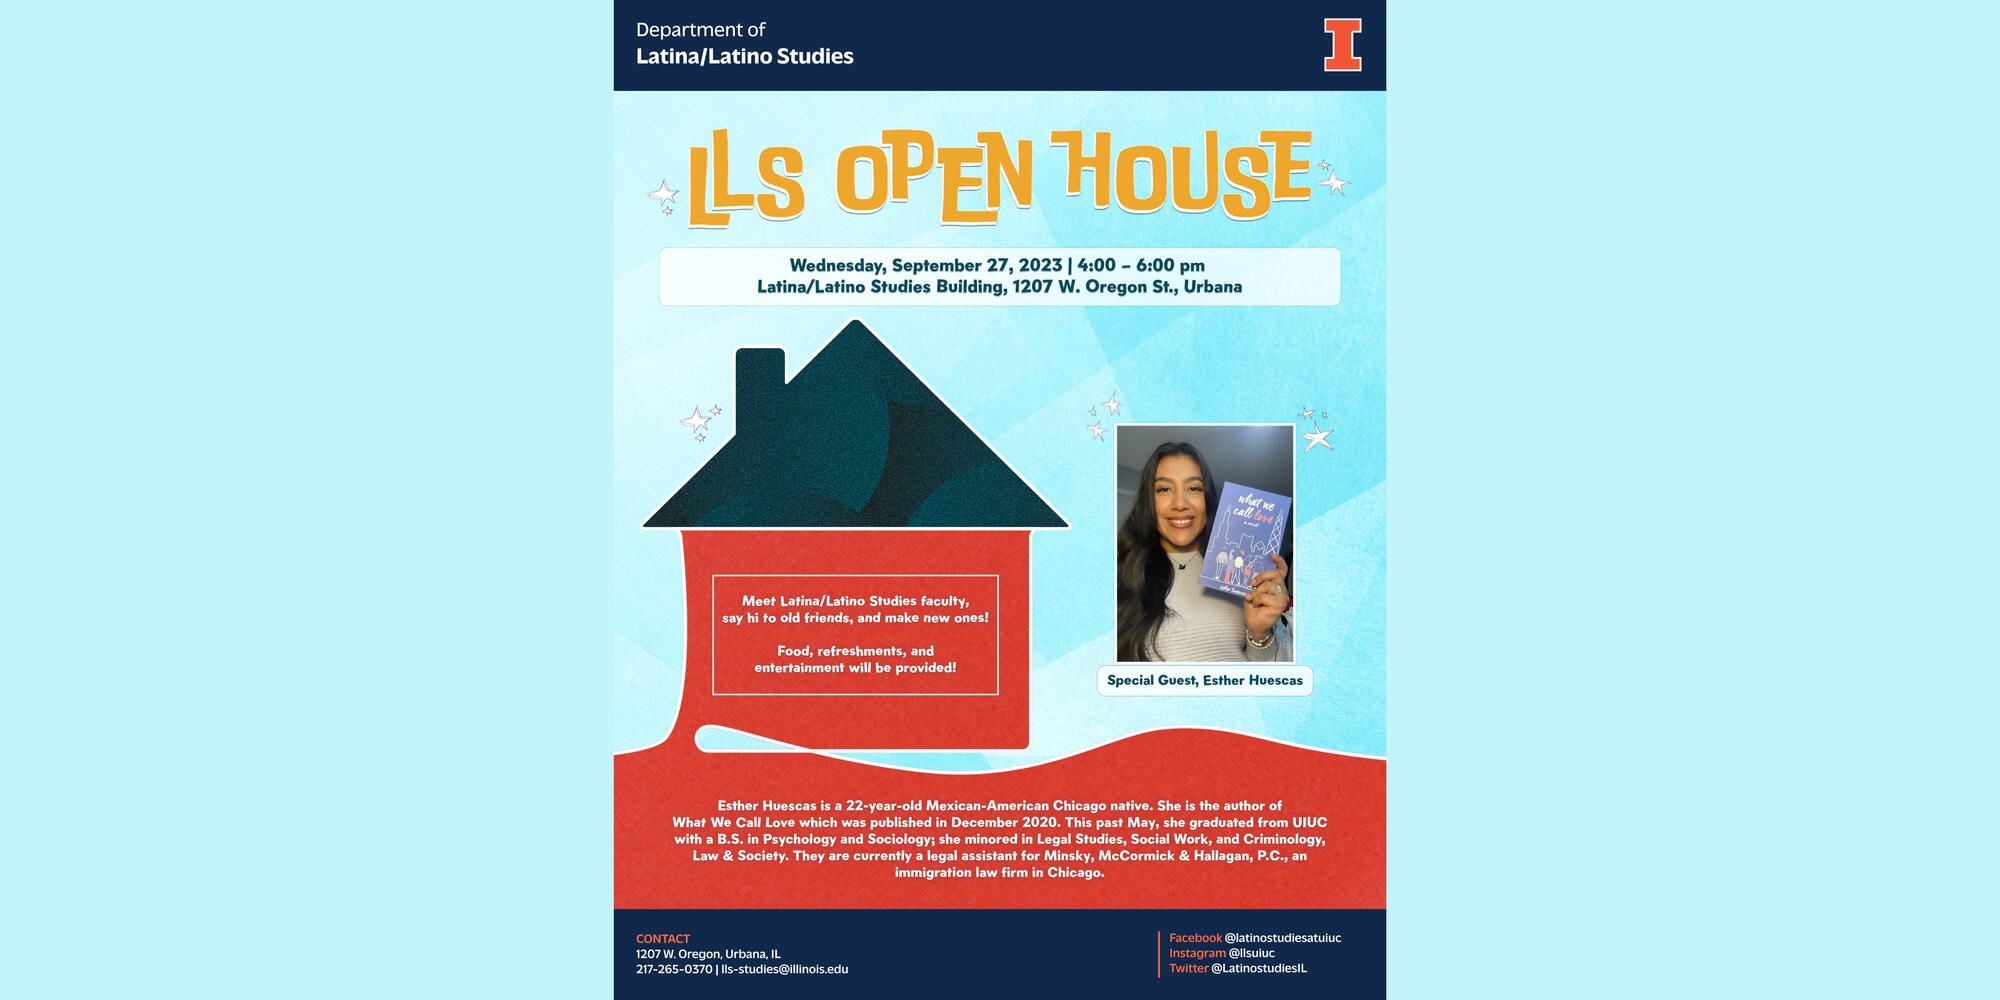 Image of LLS Open House Flyer with event information